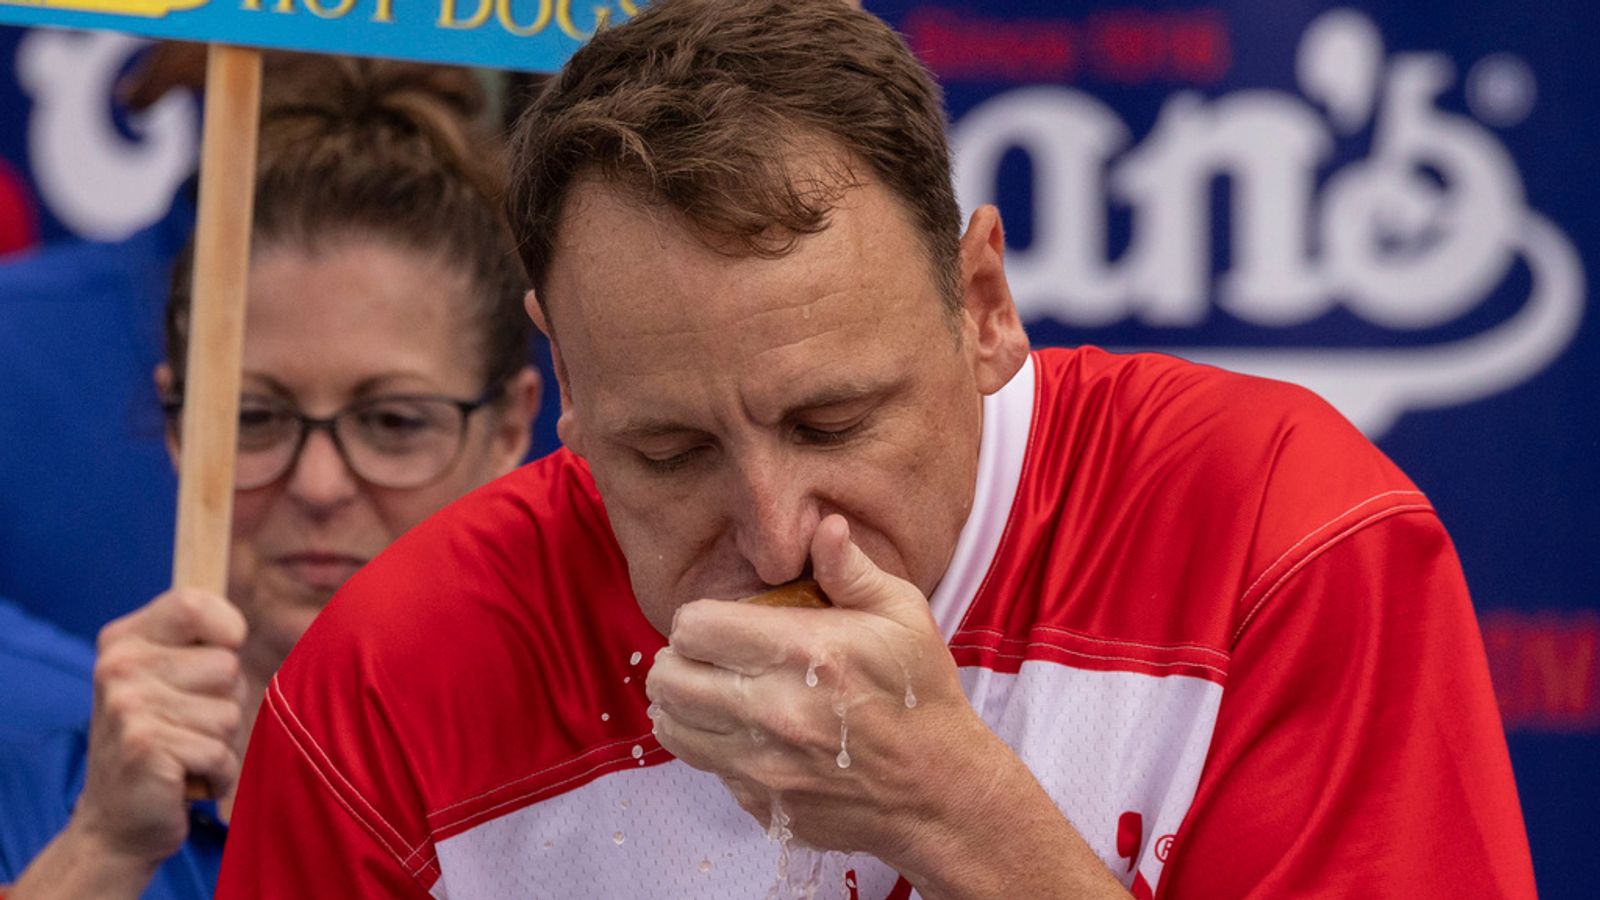 Joey Chestnut eats a hot dog as he competes for his 16th championship title during the 2023 Nathan's Famous Fourth of July hot dog eating contest in the Coney Island section of the Brooklyn borough of New York, Tuesday, July. 4, 2023. (AP Photo/Yuki Iwamura)